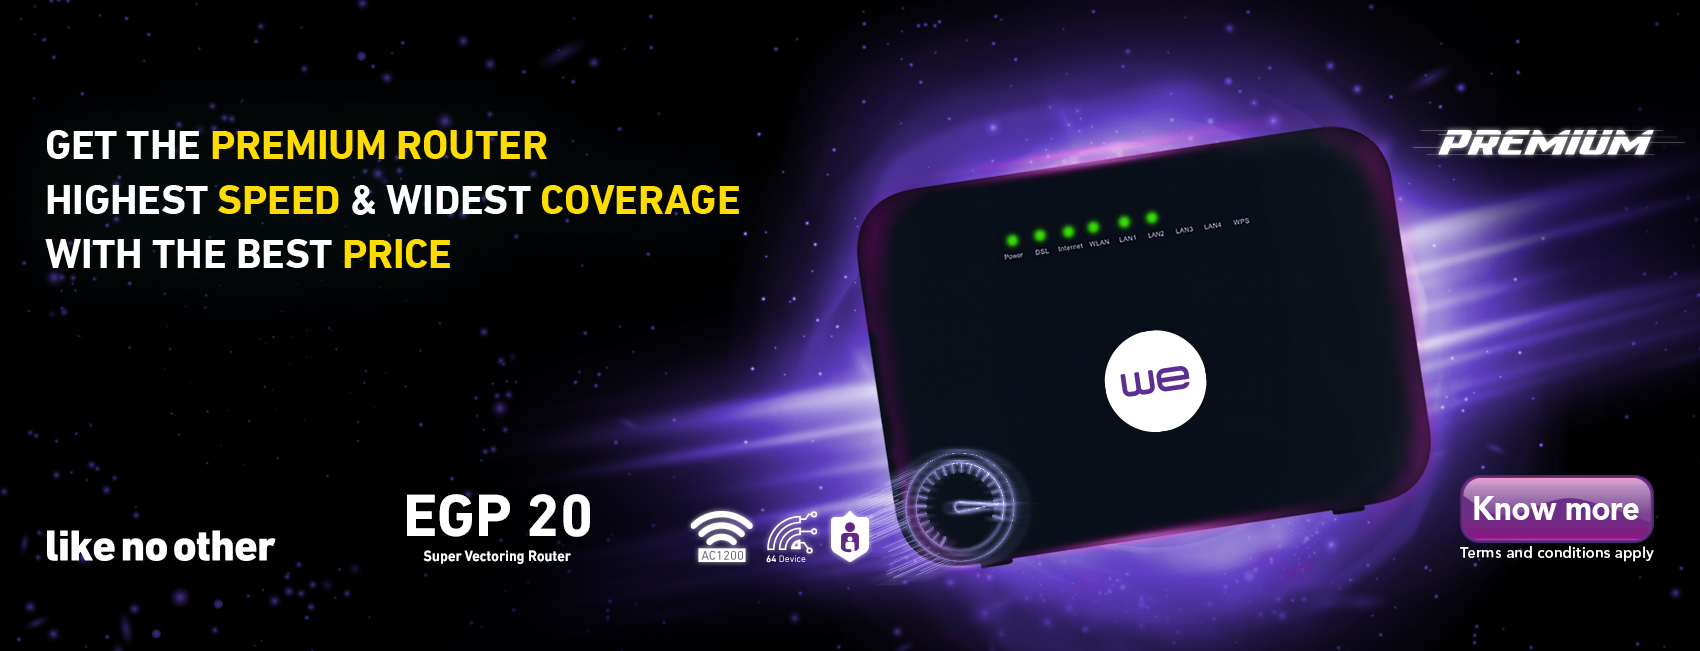 Get the premium router highest speed & widest coverage with the best price